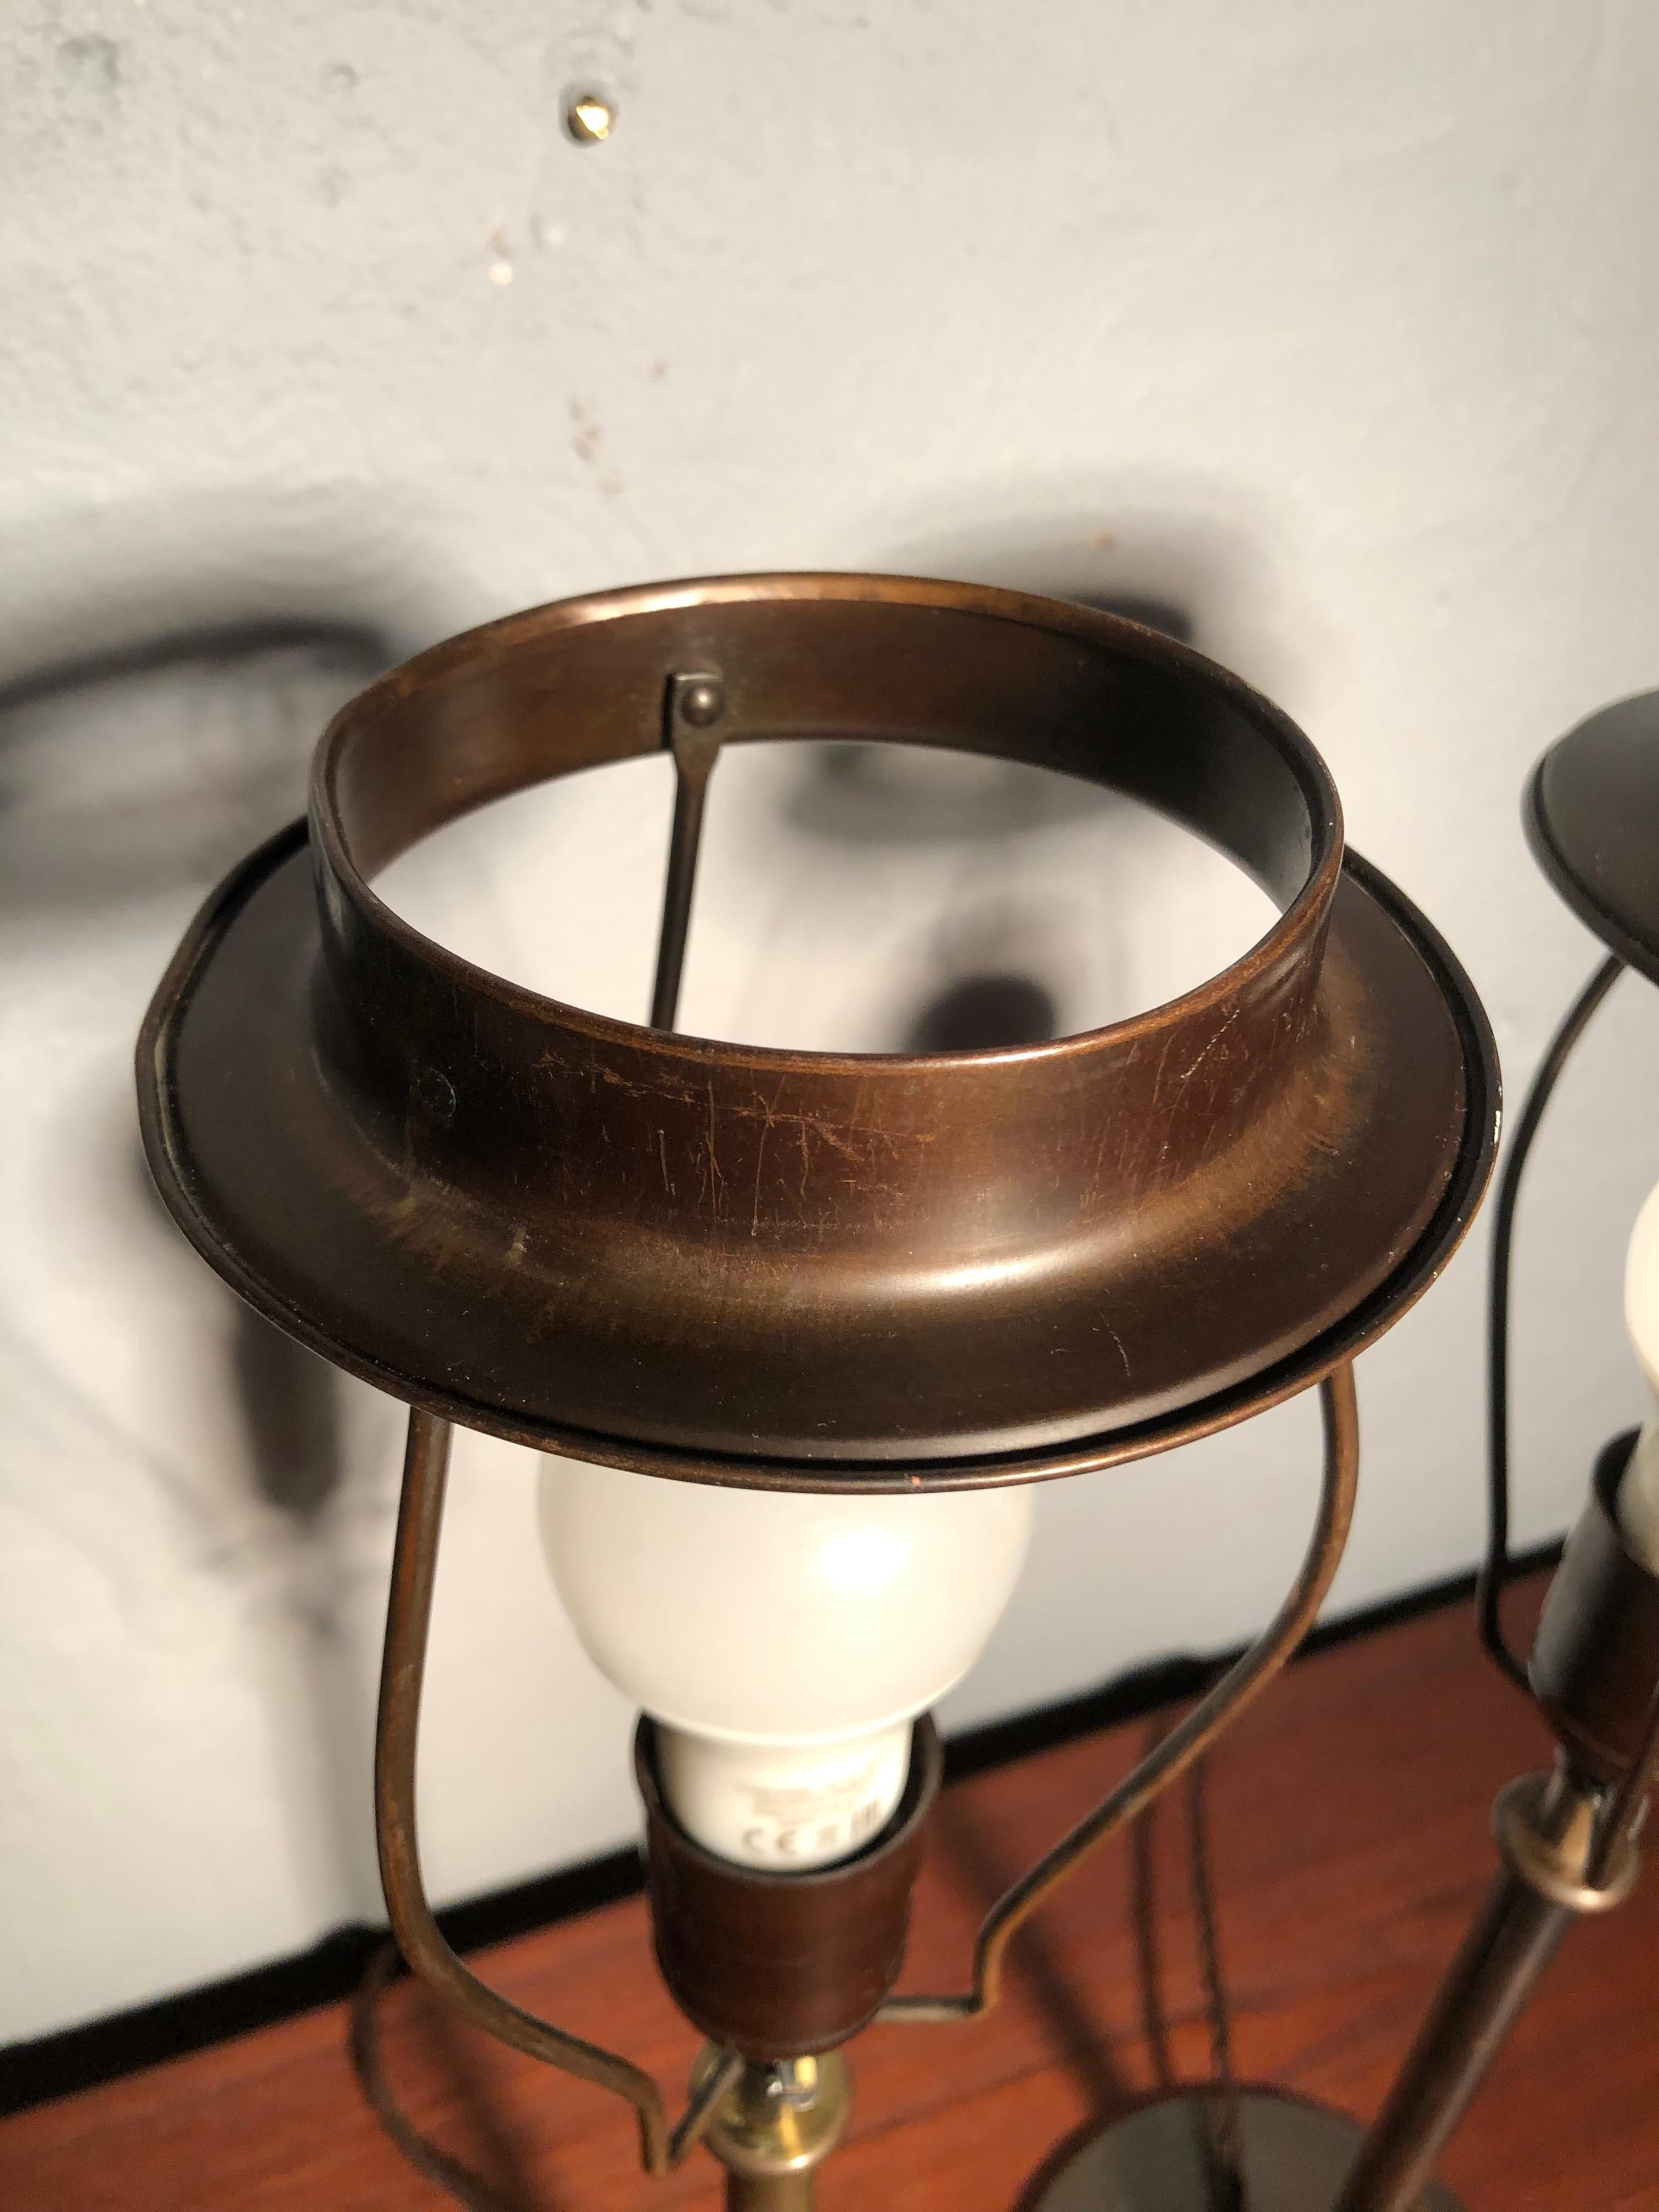 Pair of Vintage Brass Table Lamps by Fog & Mørup Lamp Makers from the 1940s For Sale 9